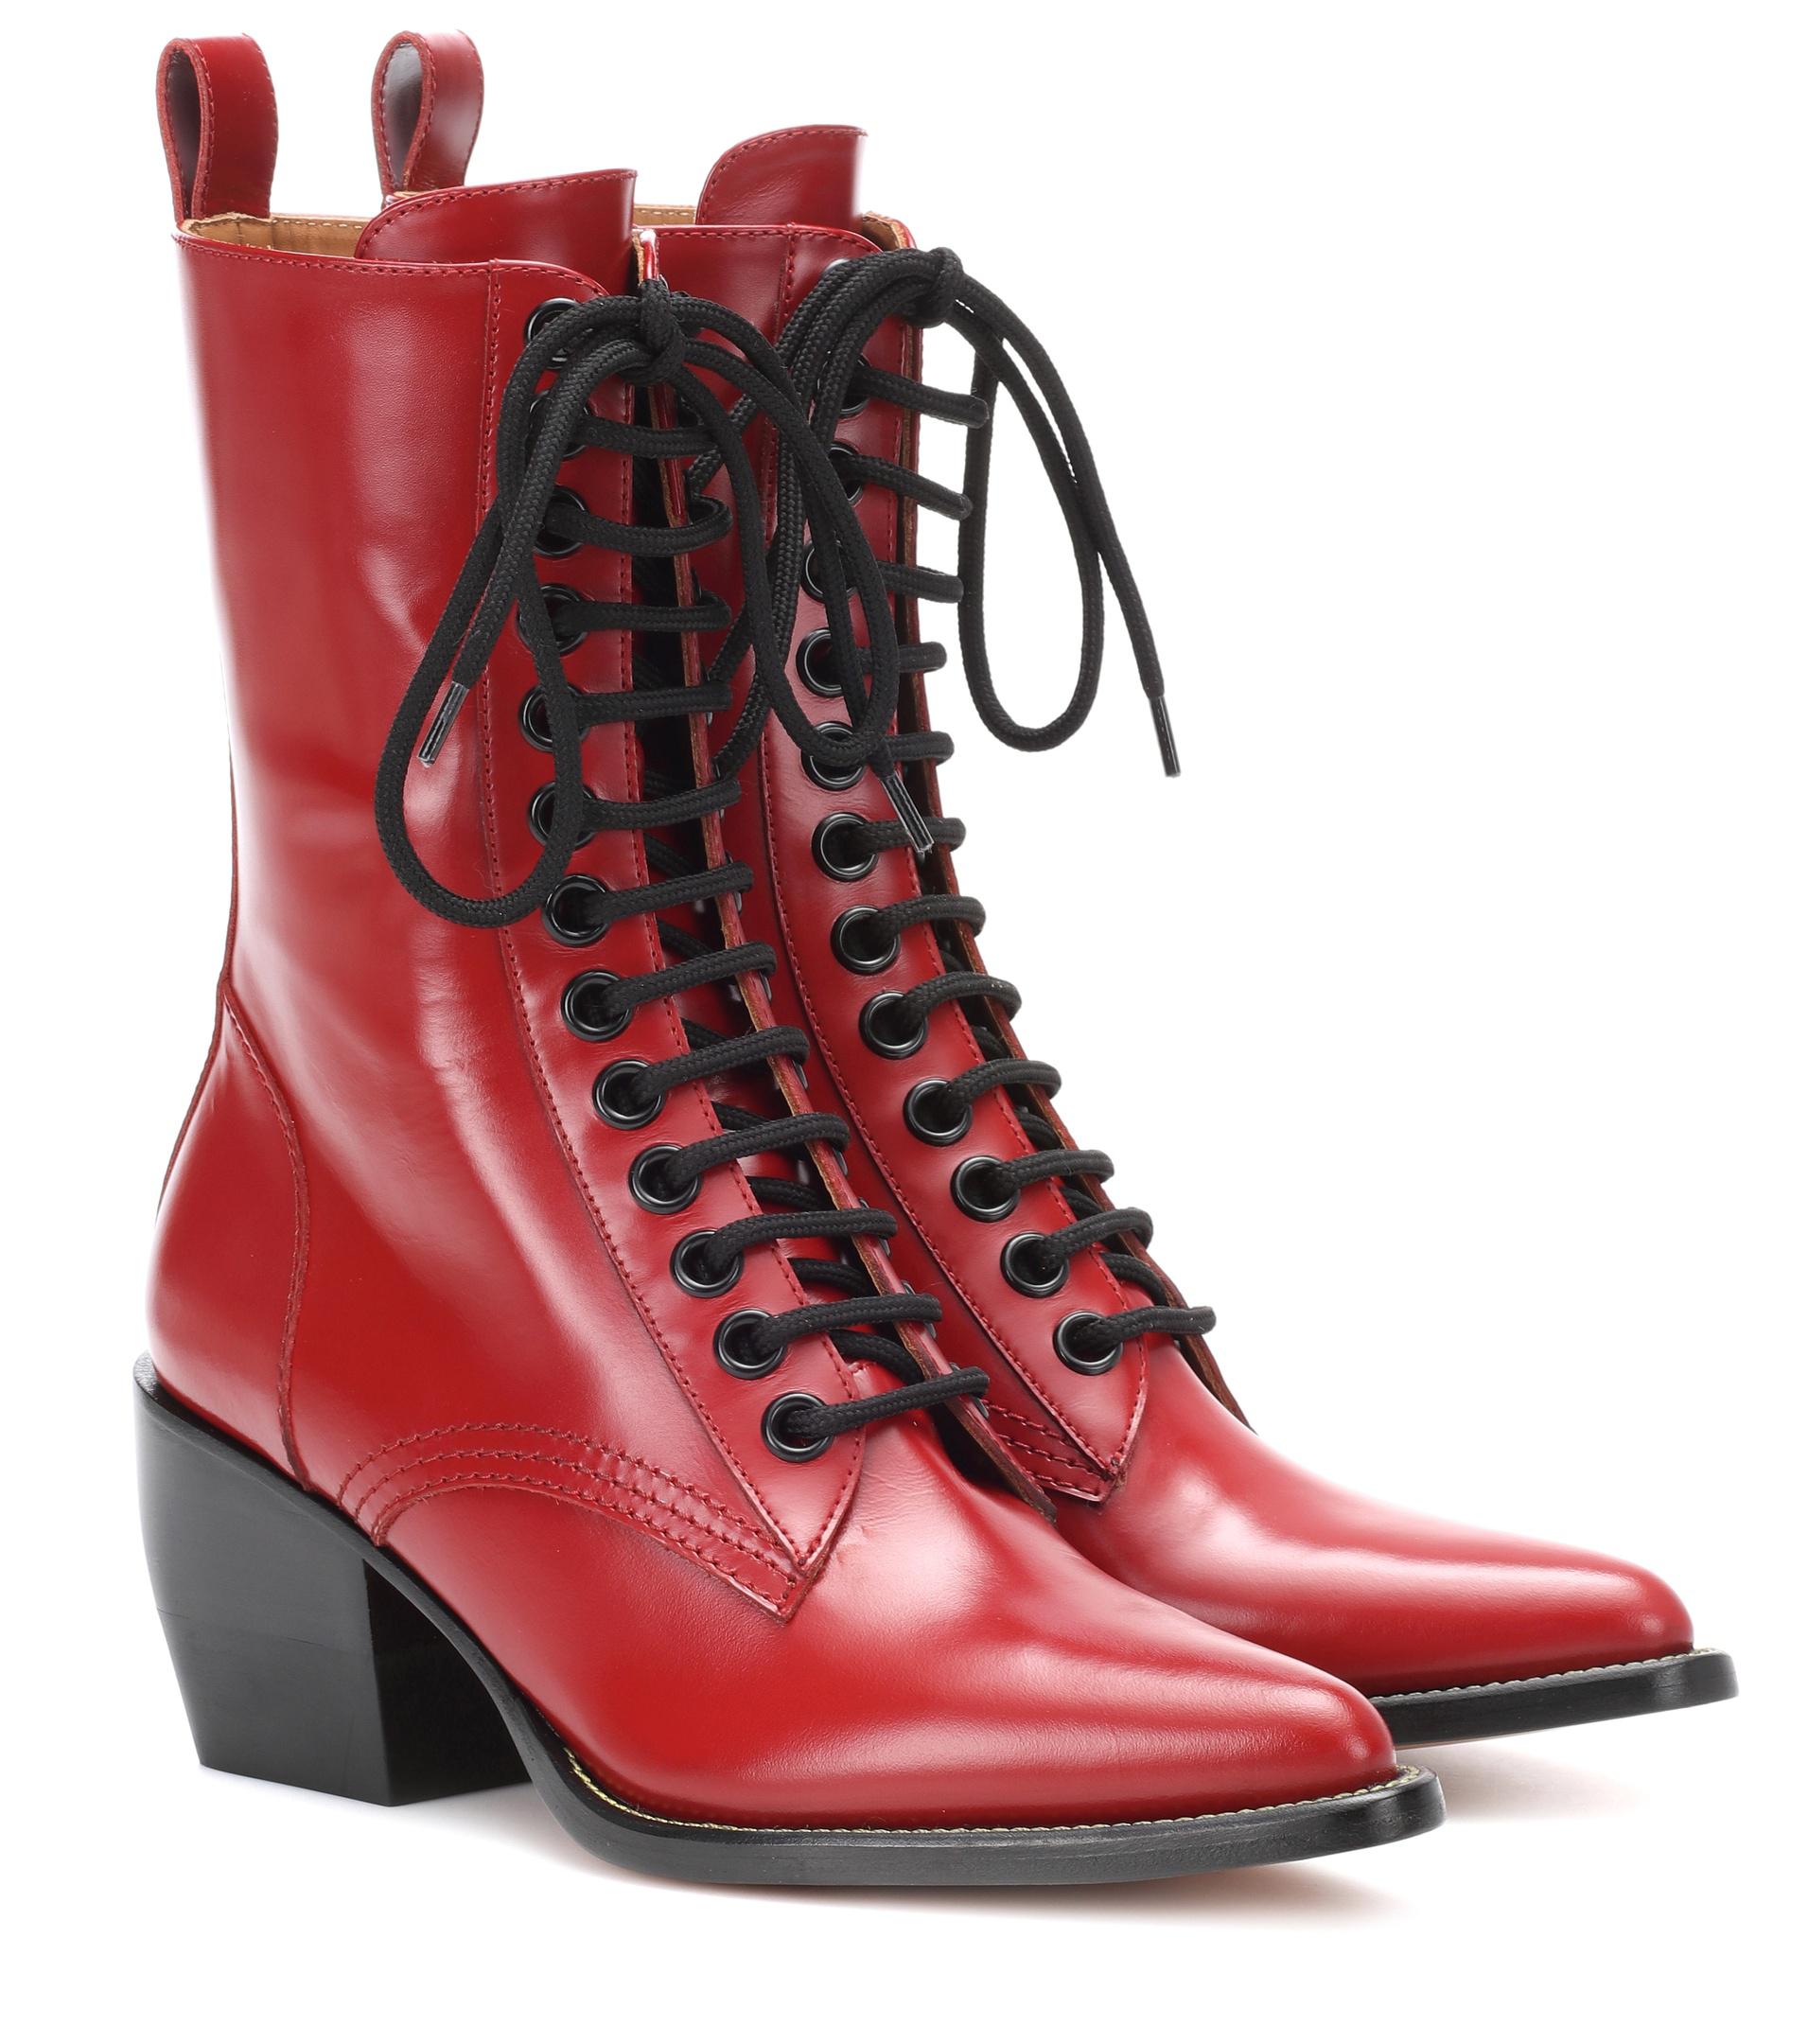 Chloé Rylee Medium Leather Ankle Boots 